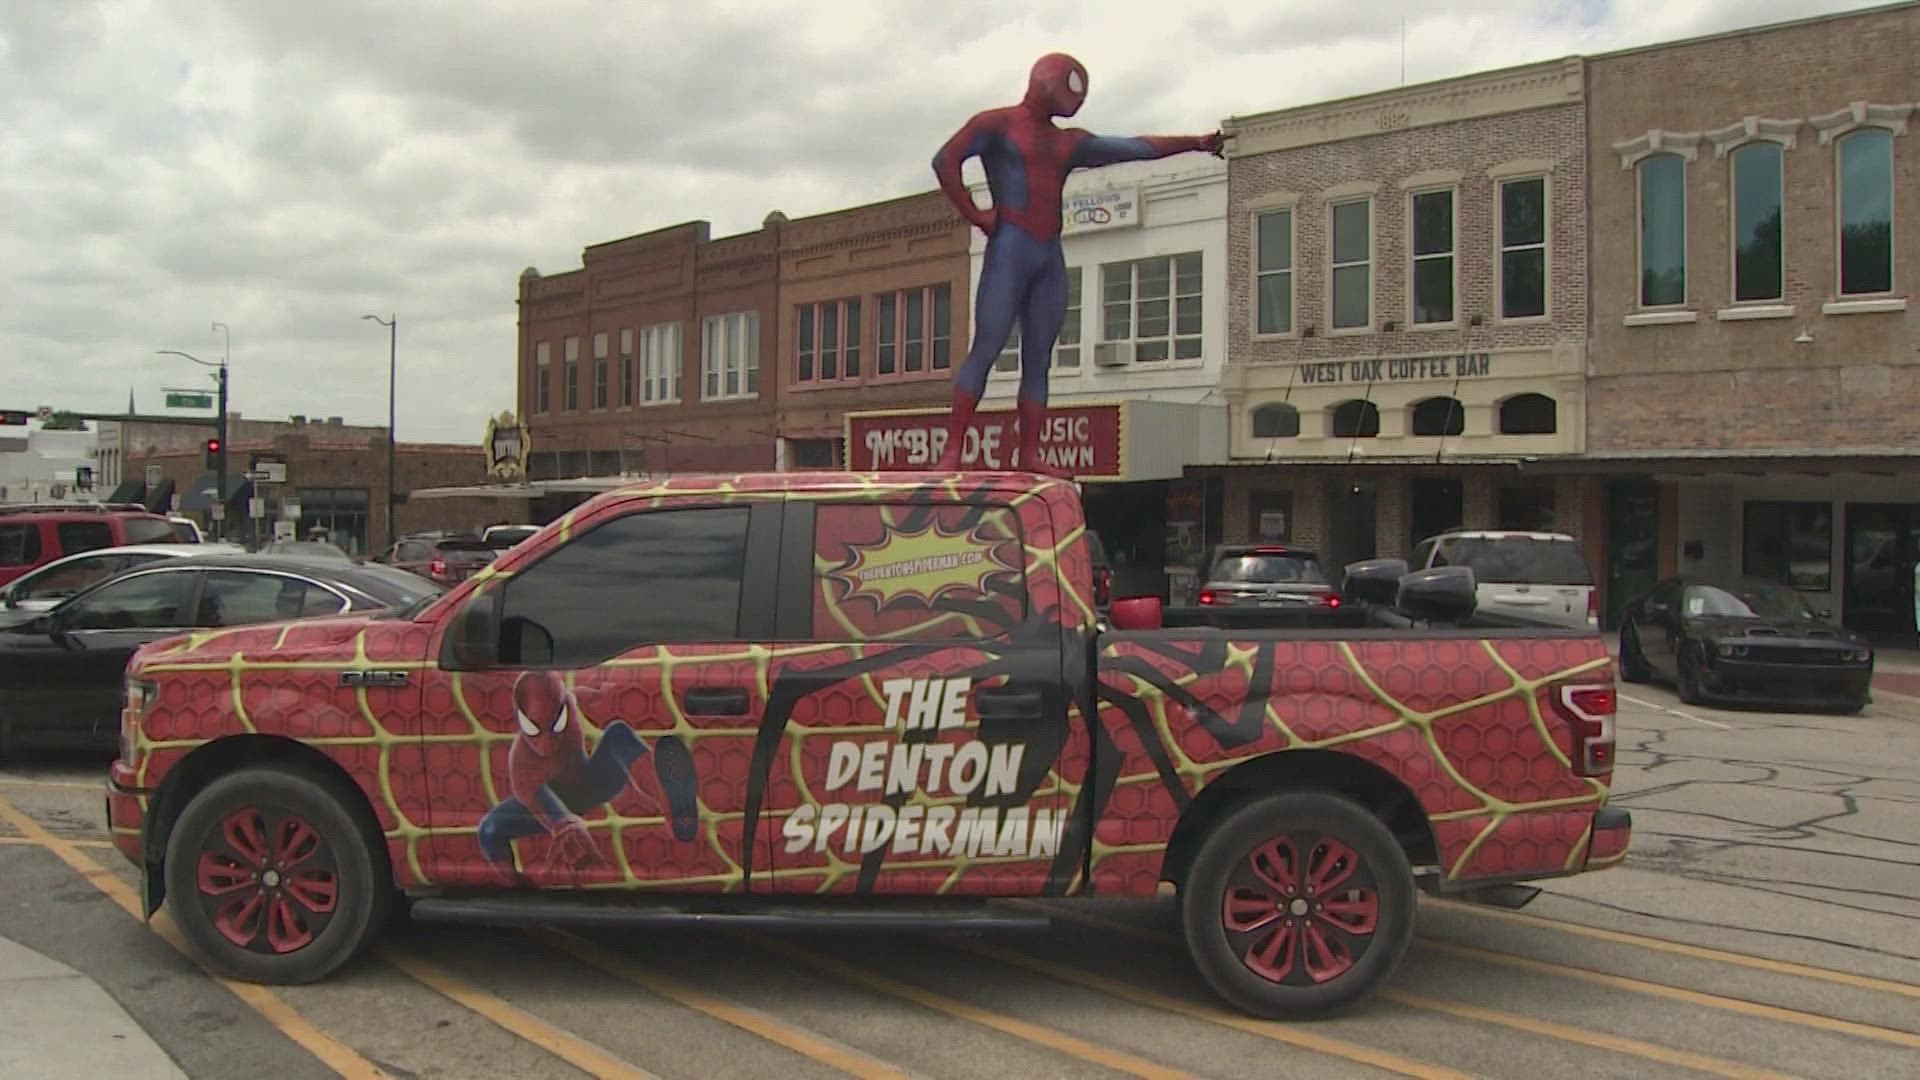 Your friendly neighborhood Denton Spiderman is on a mission: a mission to help as many children as possible in Uvalde, Texas when he visits in June.